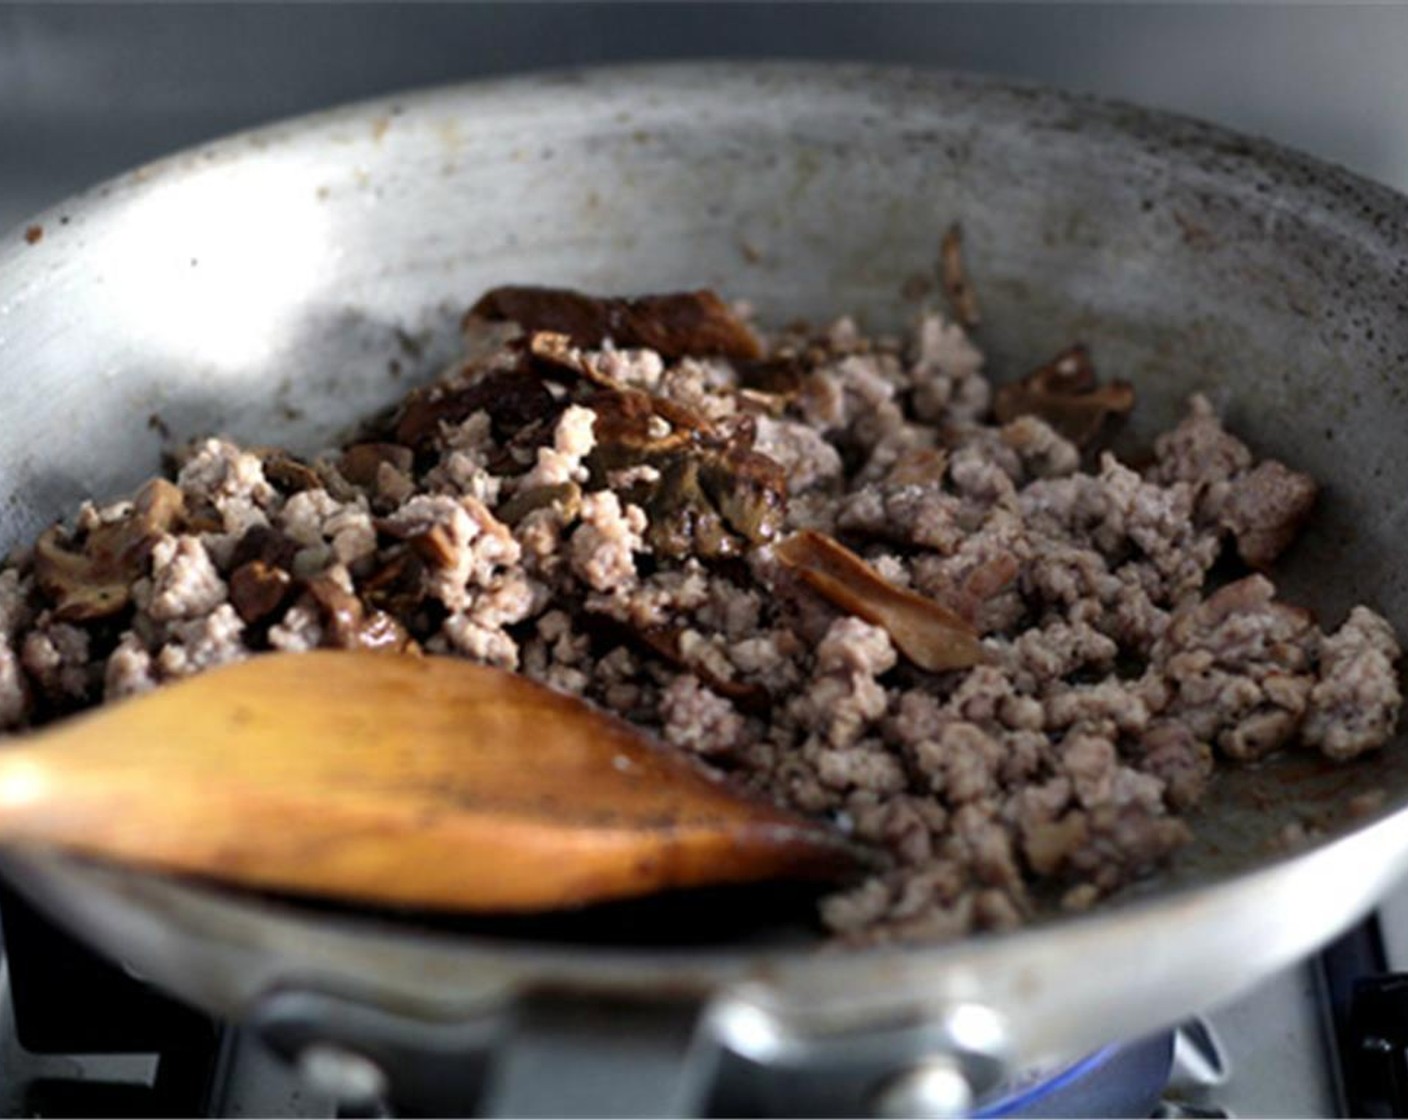 step 17 Add Extra-Virgin Olive Oil (2 Tbsp) in the skillet and the Anchovies (2), break it up with a wooden spoon until it melts into the oil. Add ground pork, breaking it up with a wooden spoon and cook until evenly browned.